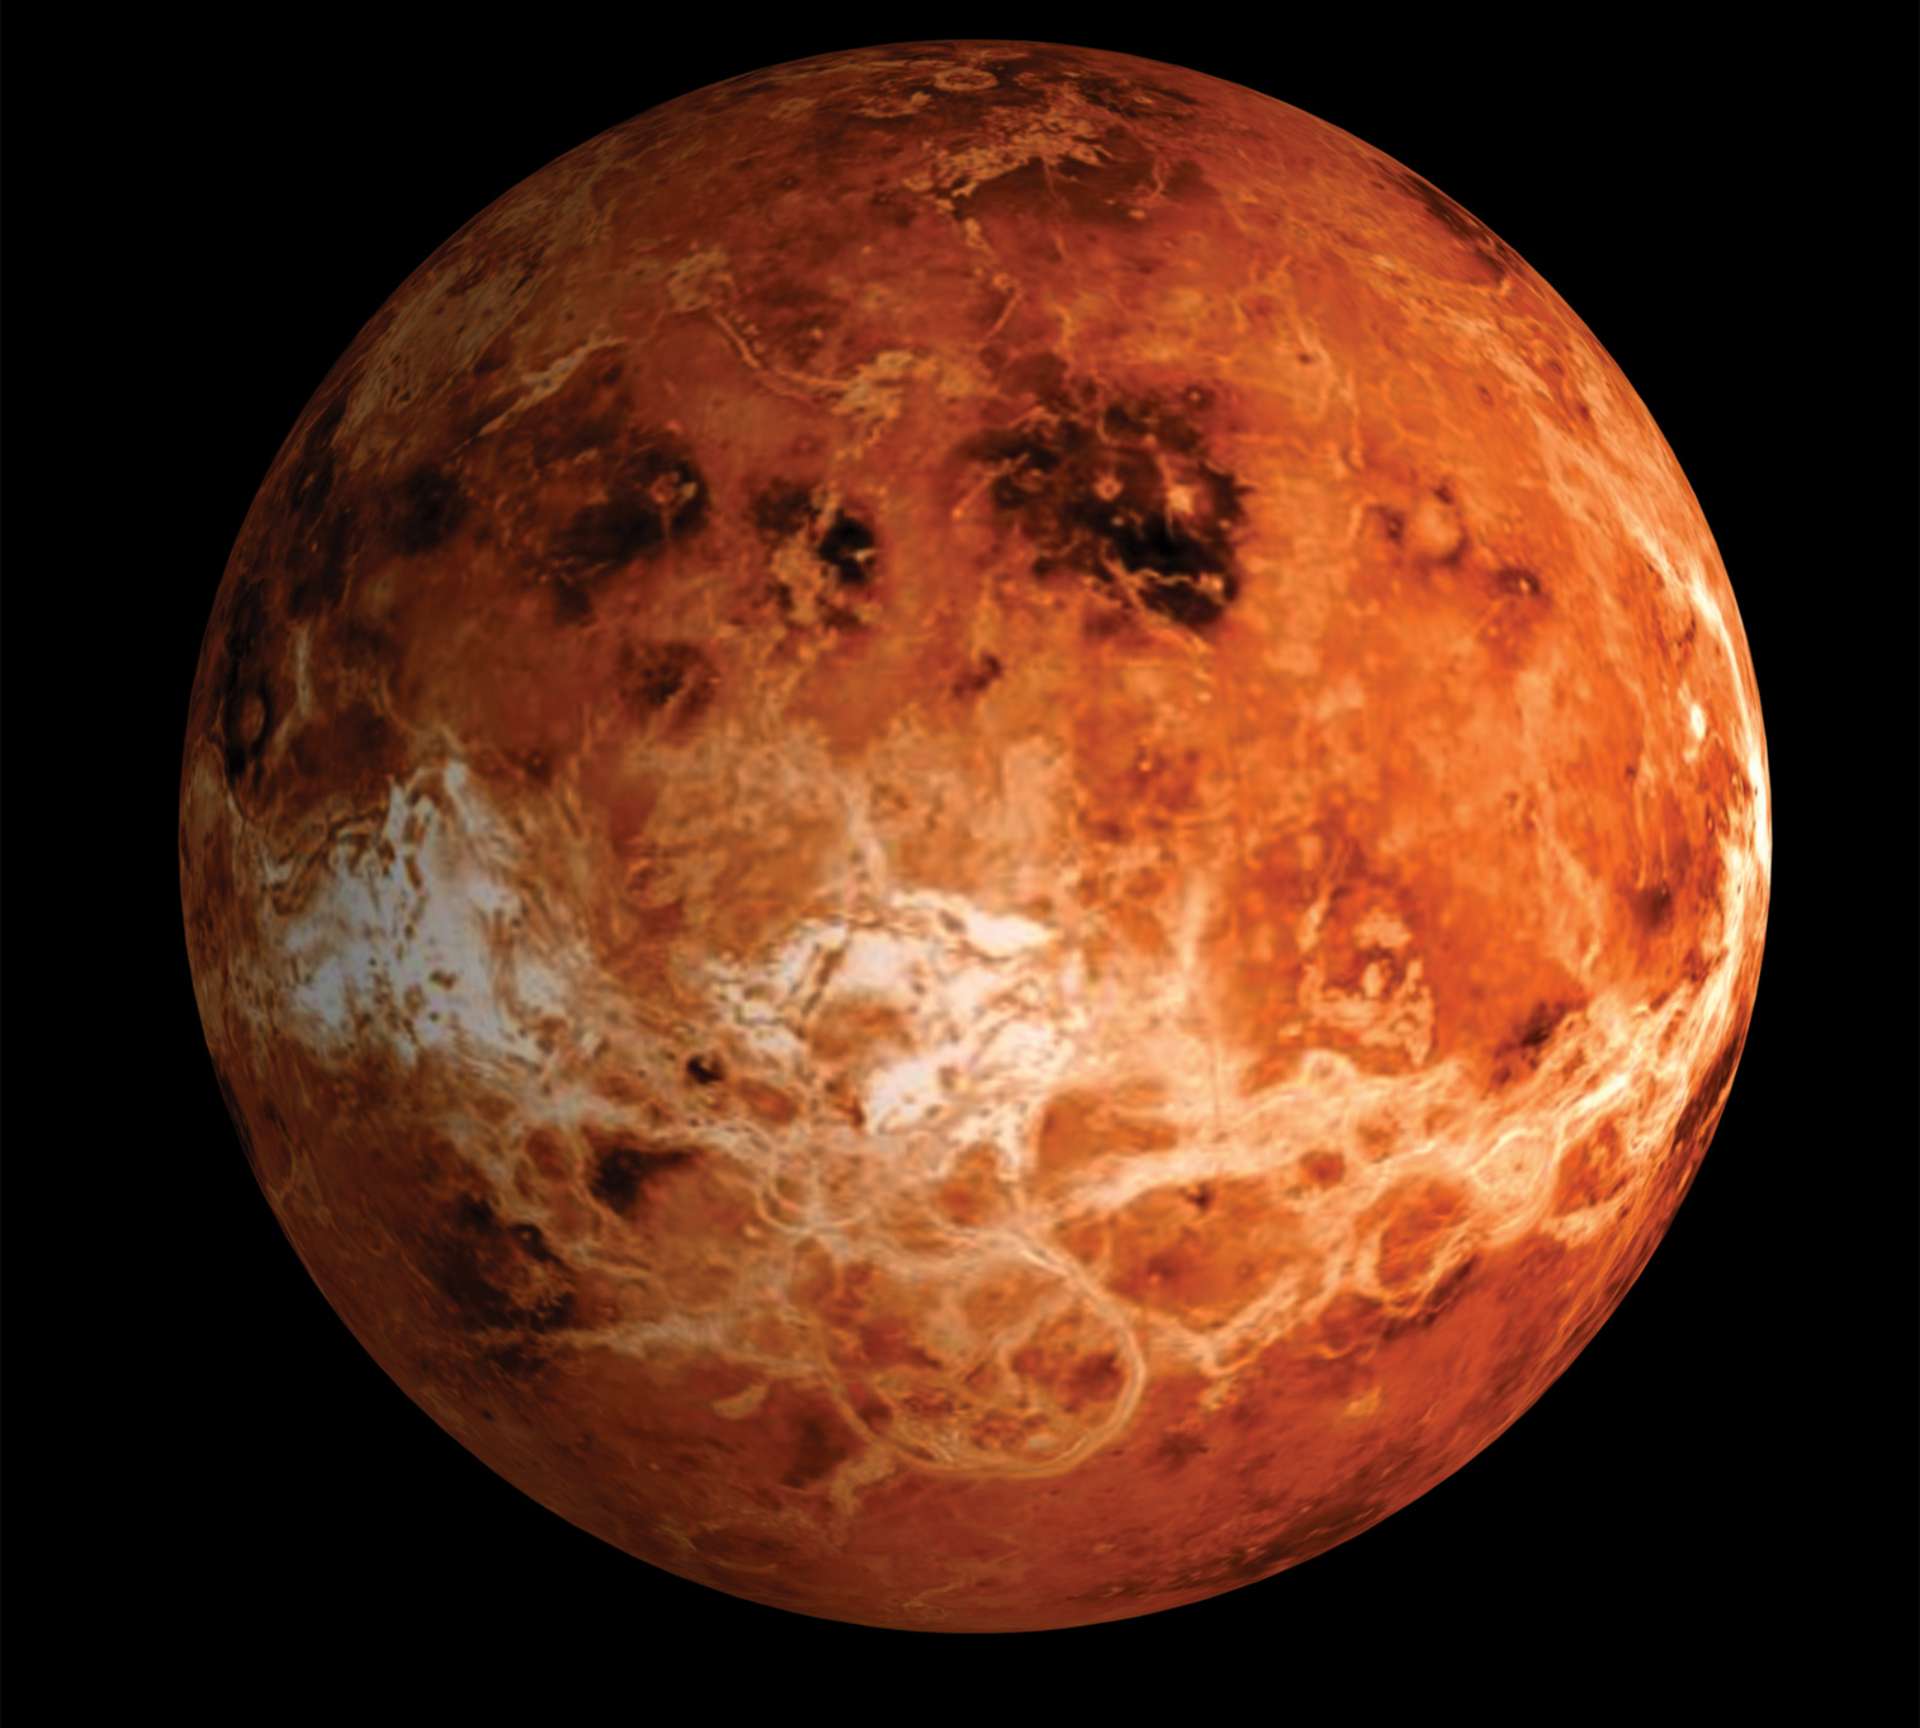 Atomic oxygen was first discovered on the “day” side of Venus